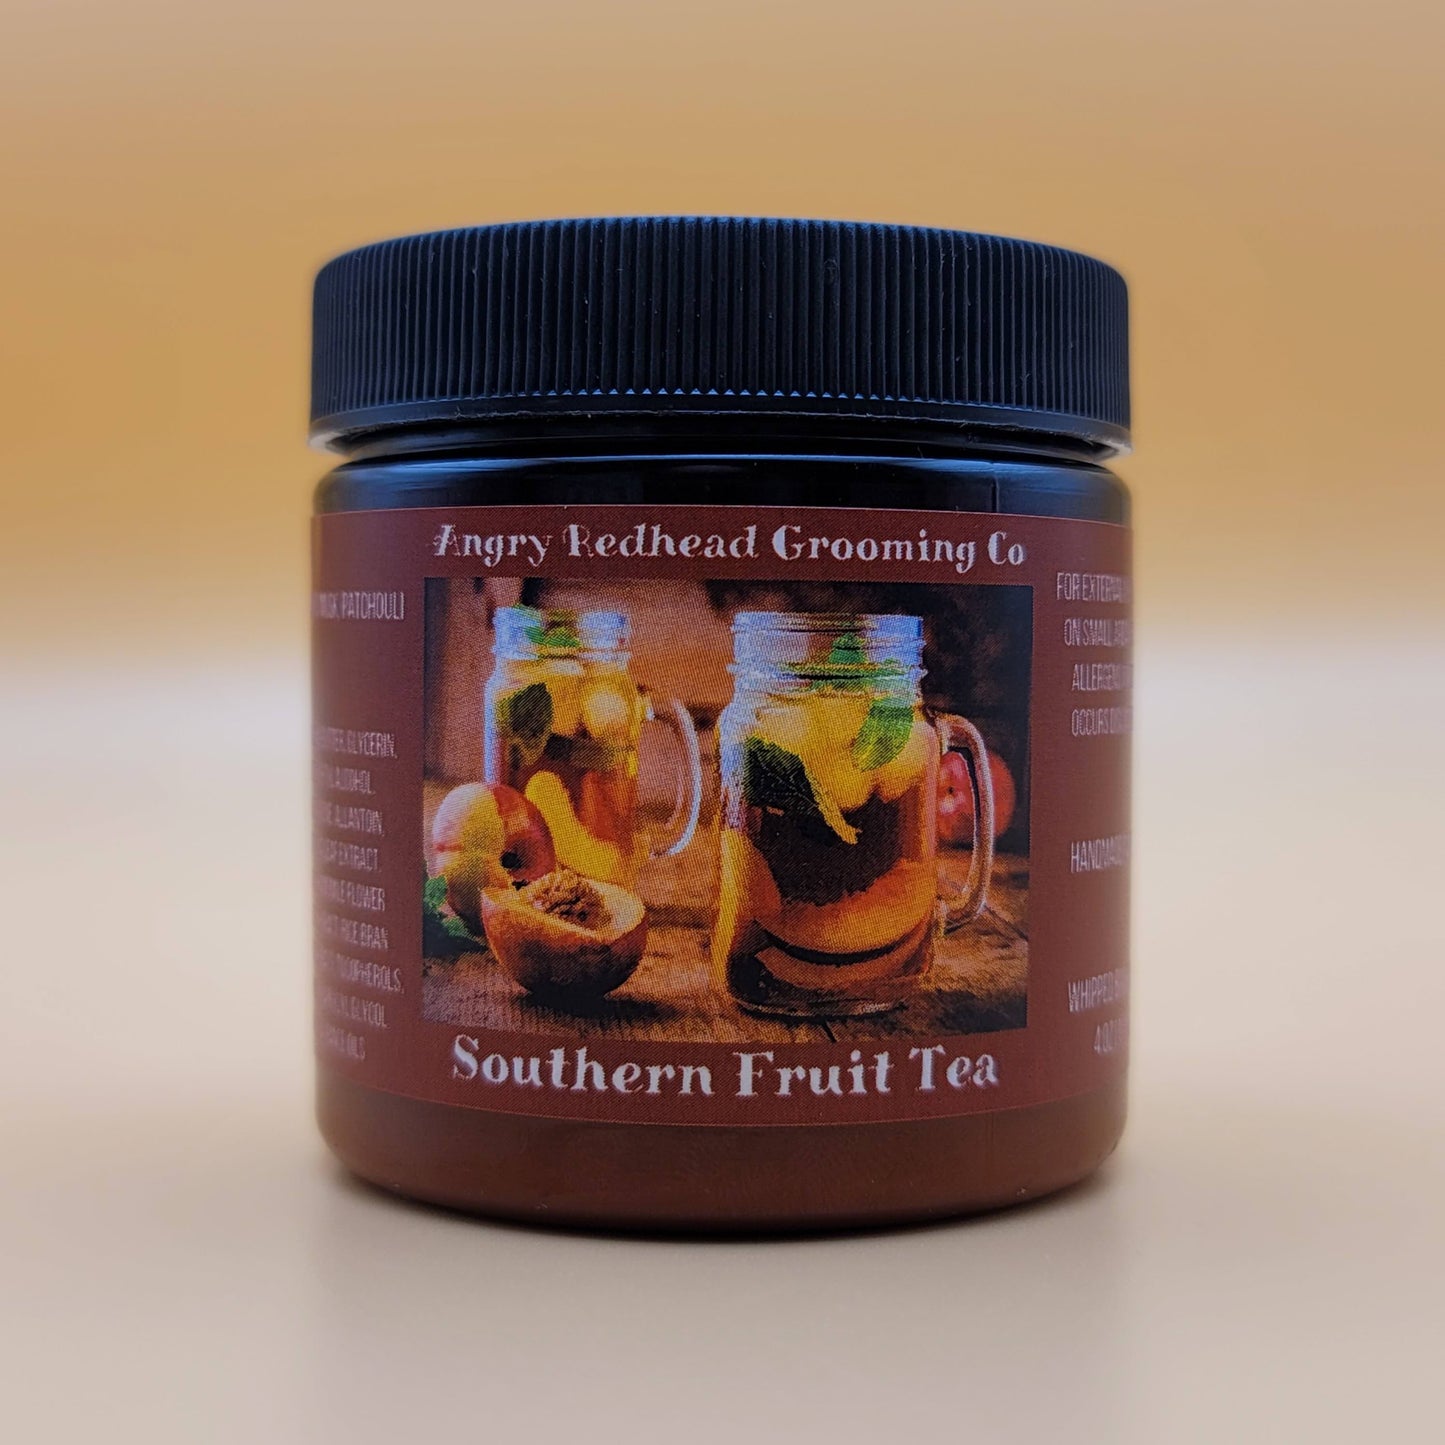 Southern Fruit Tea Body Butter by Angry Redhead Grooming Co - angryredheadgrooming.com